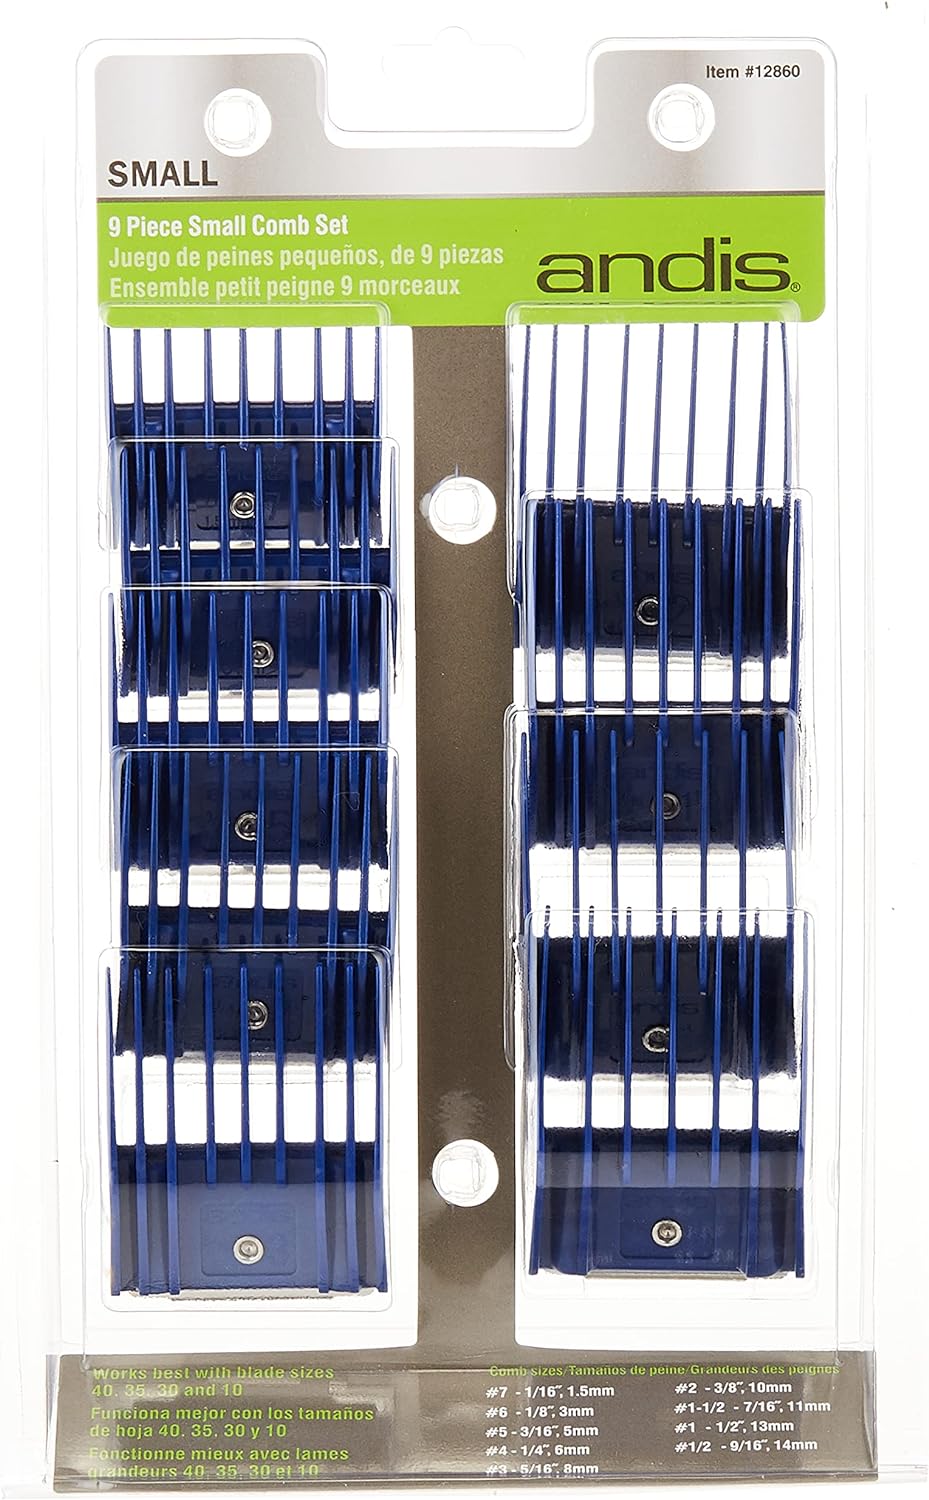 Andis Clipper Combs for Small Pets, Blue, (Pack of 9) (12860)